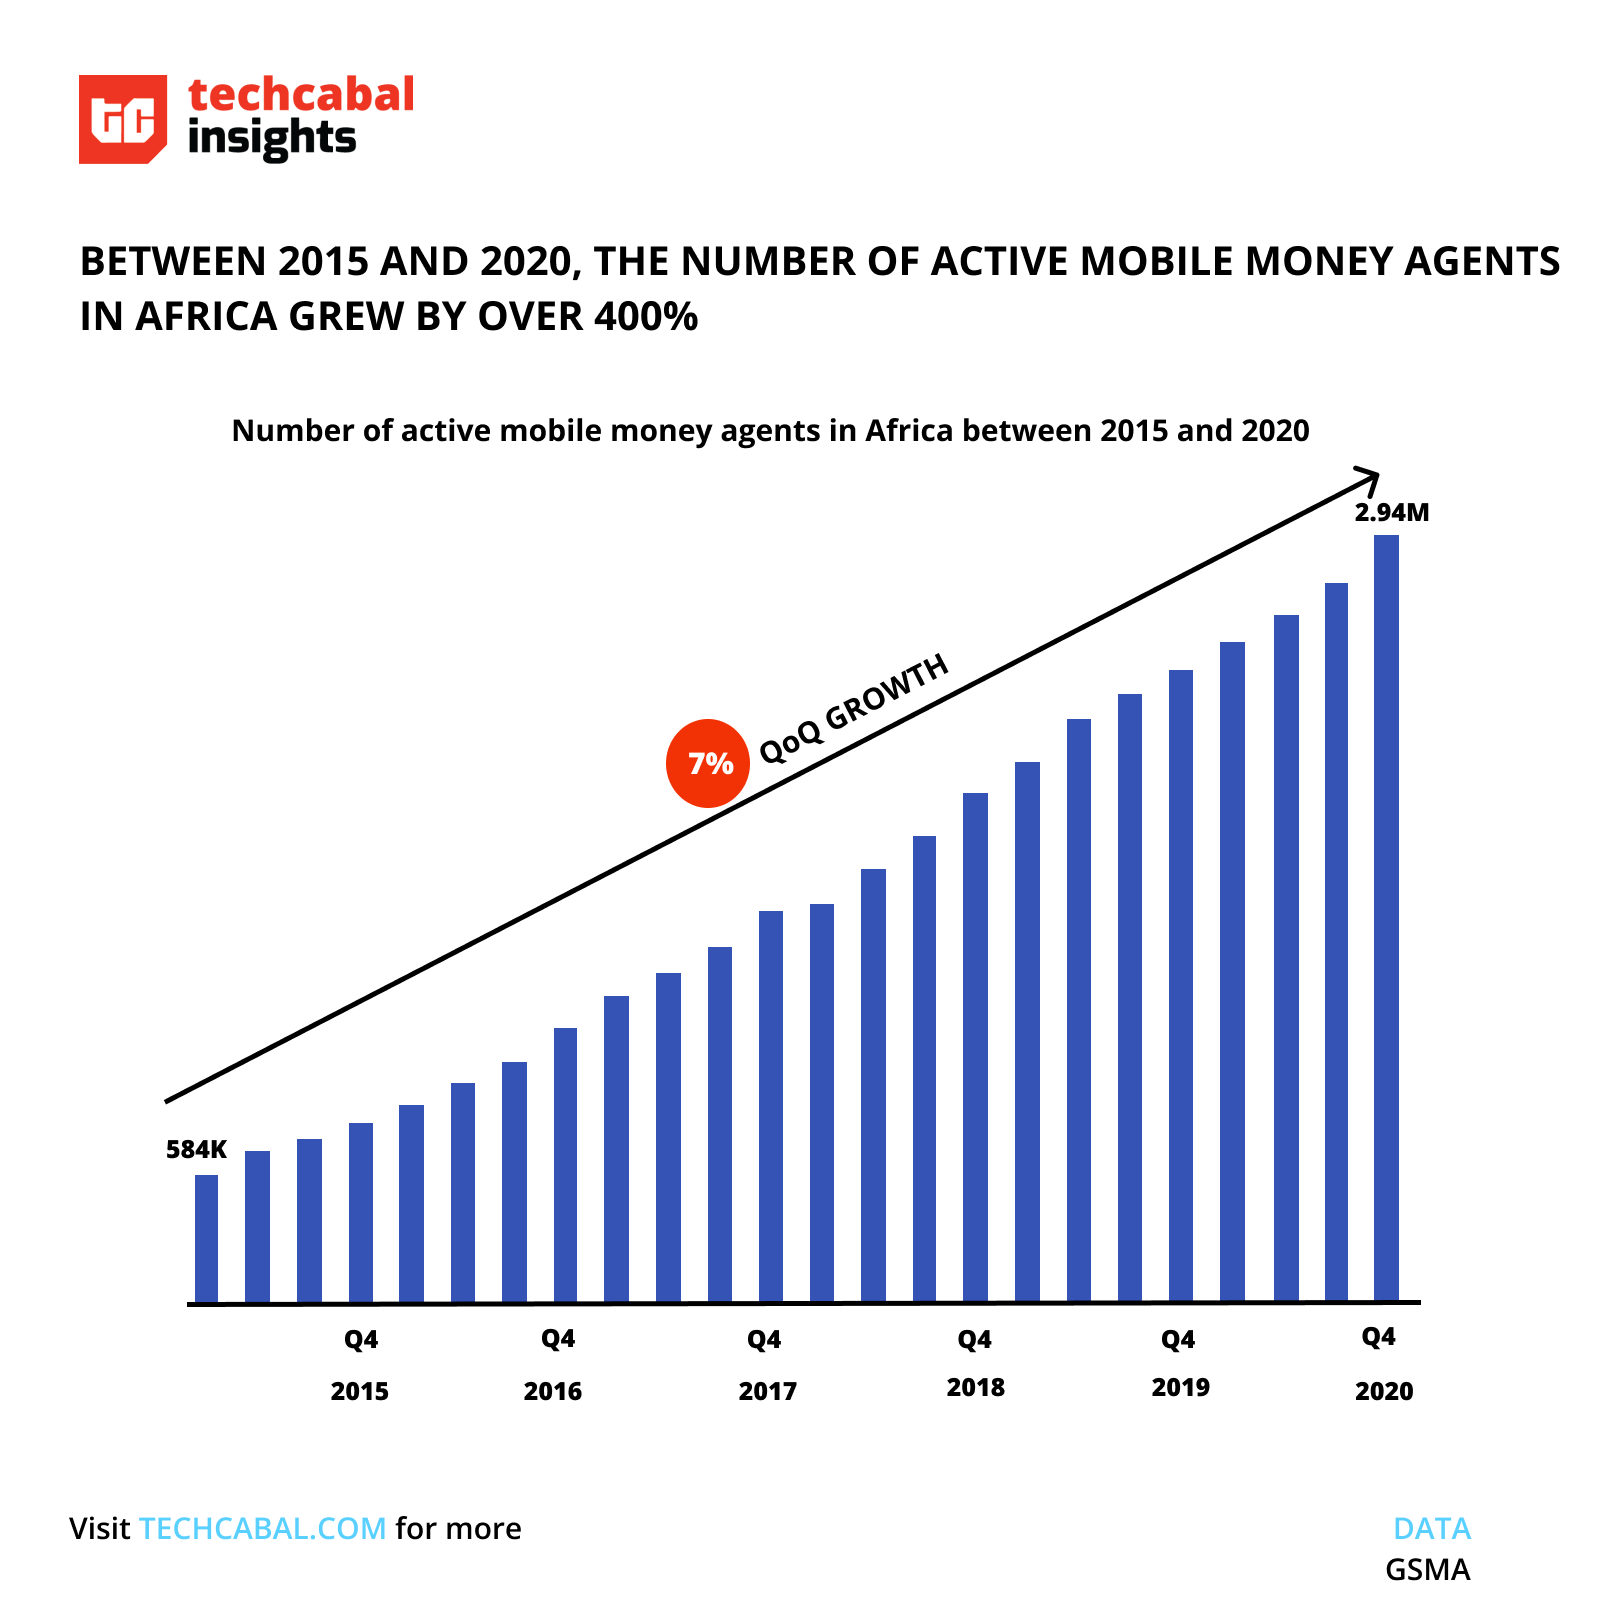 Chart showing the growth of active mobile money agents in Africa between 2015 and 2020